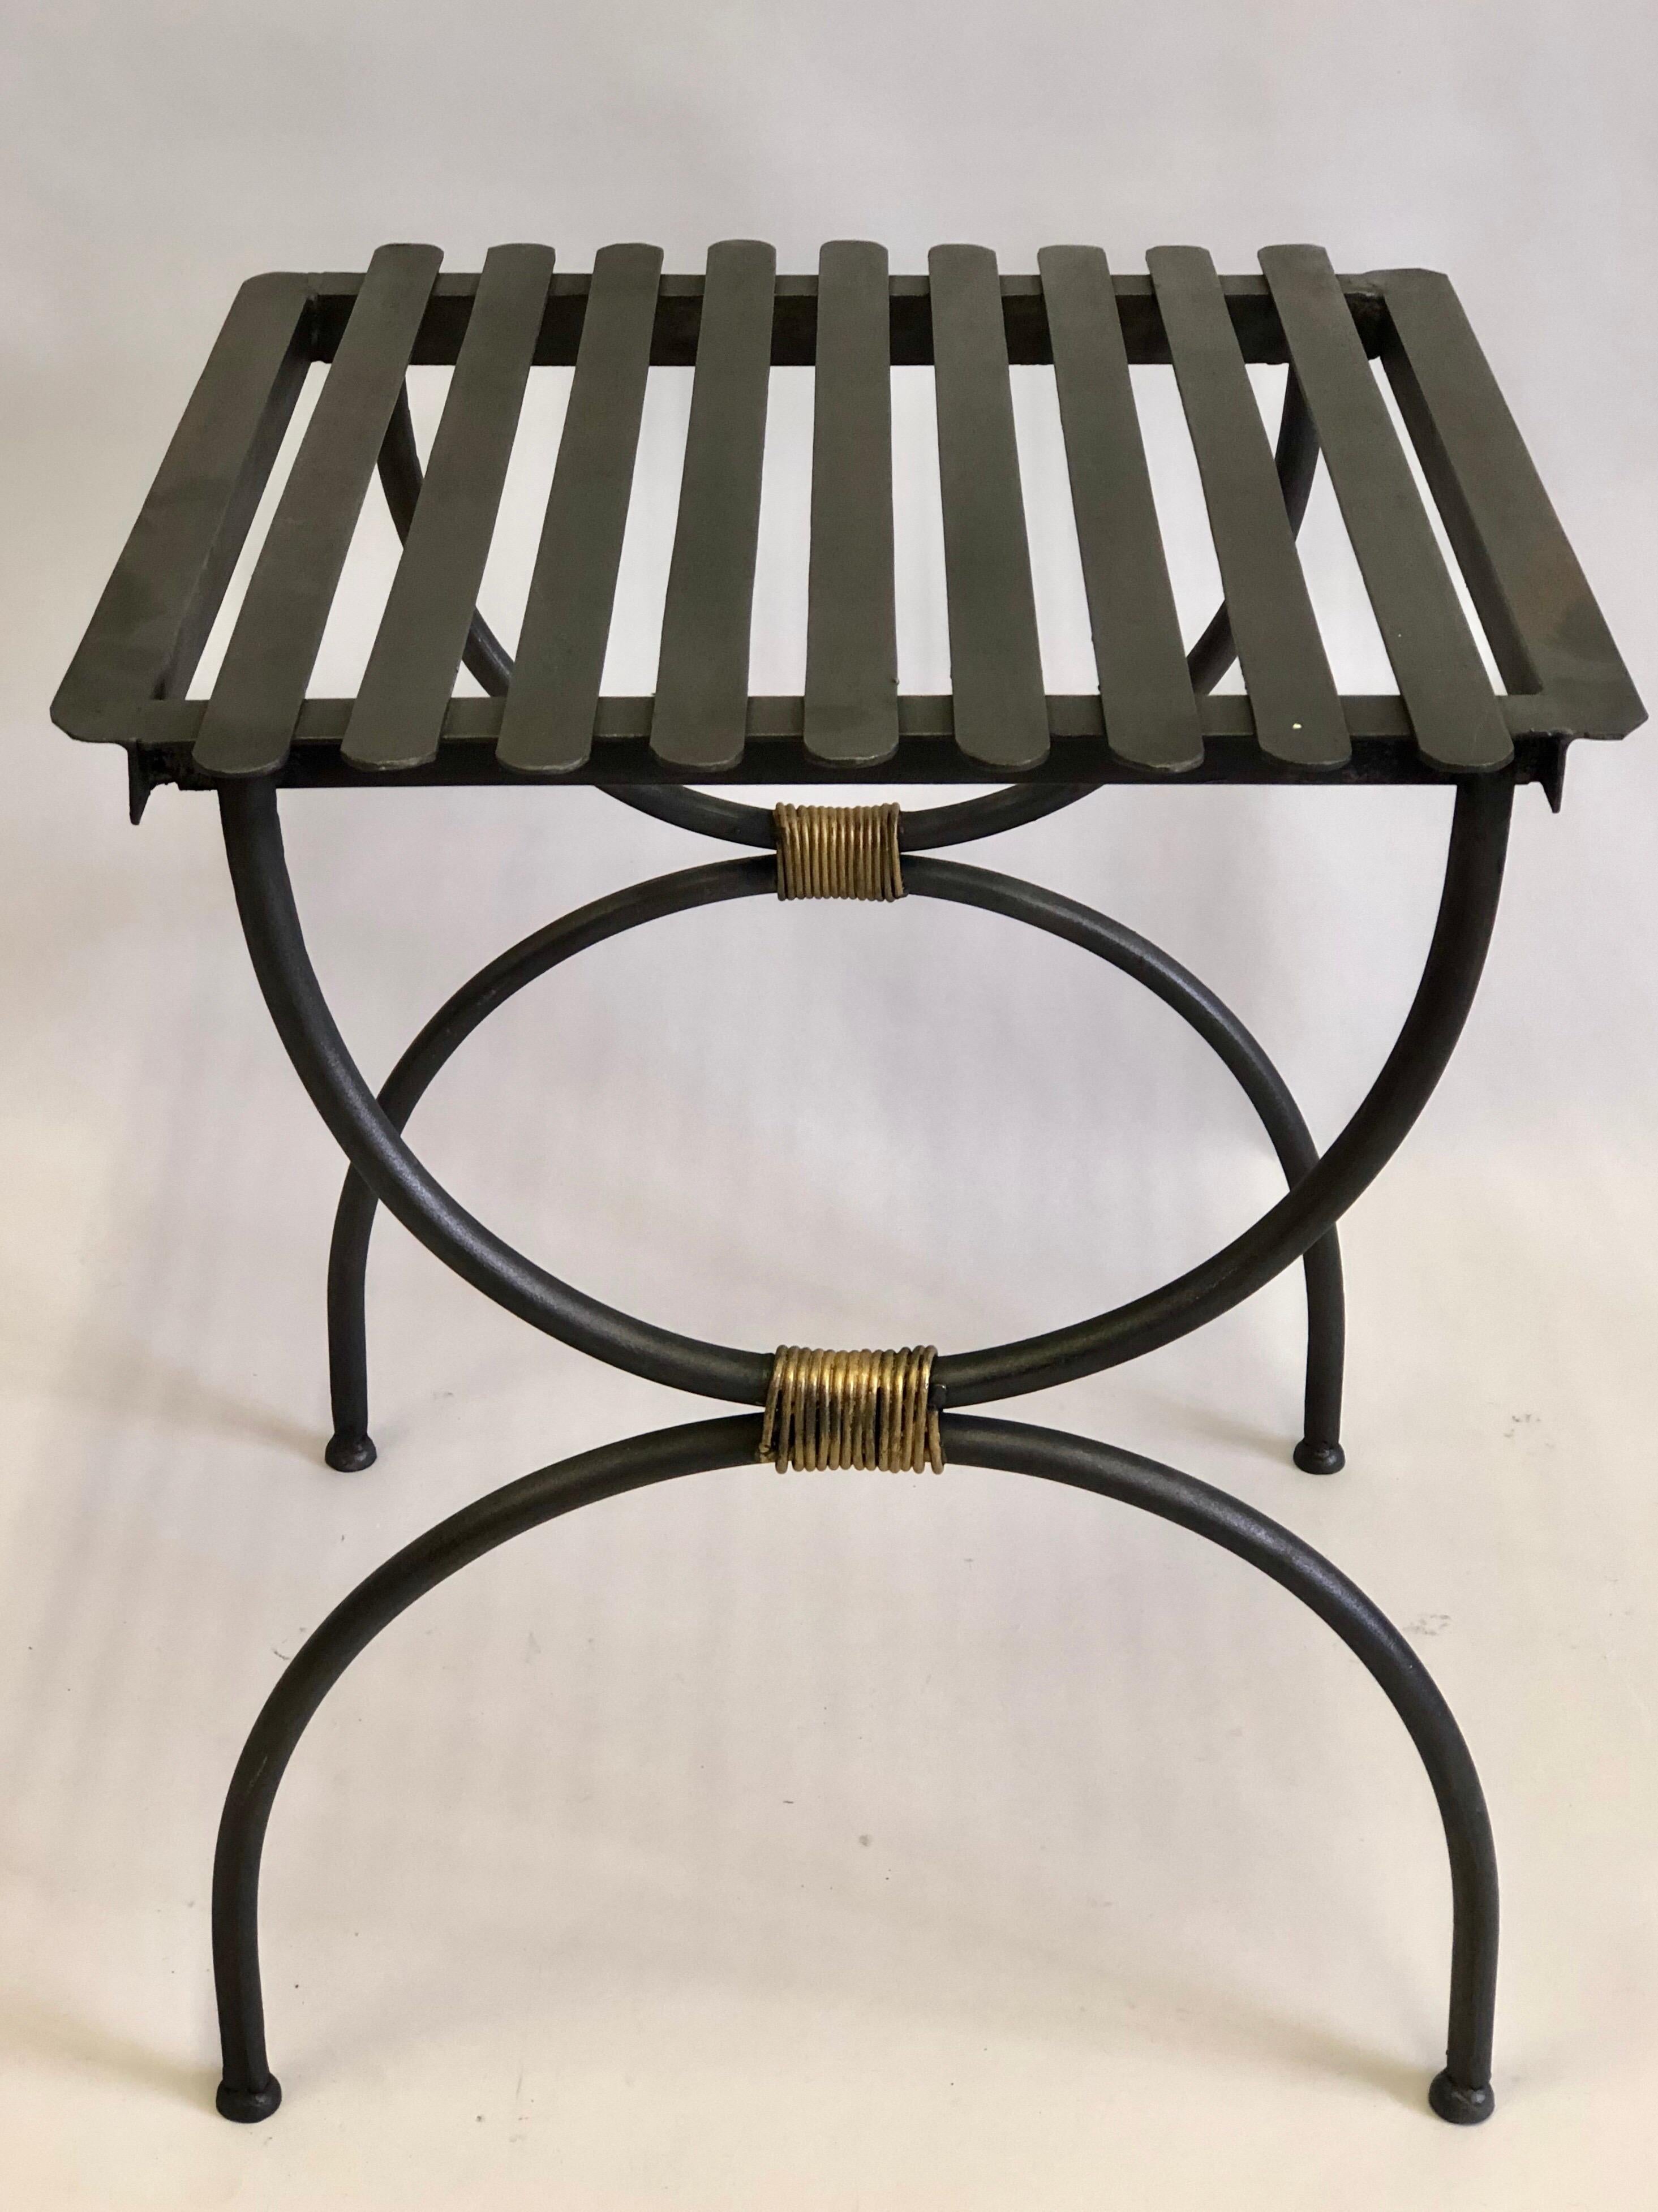 Gilt Pair of French Modern Neoclassical Iron Benches / Luggage Racks  For Sale